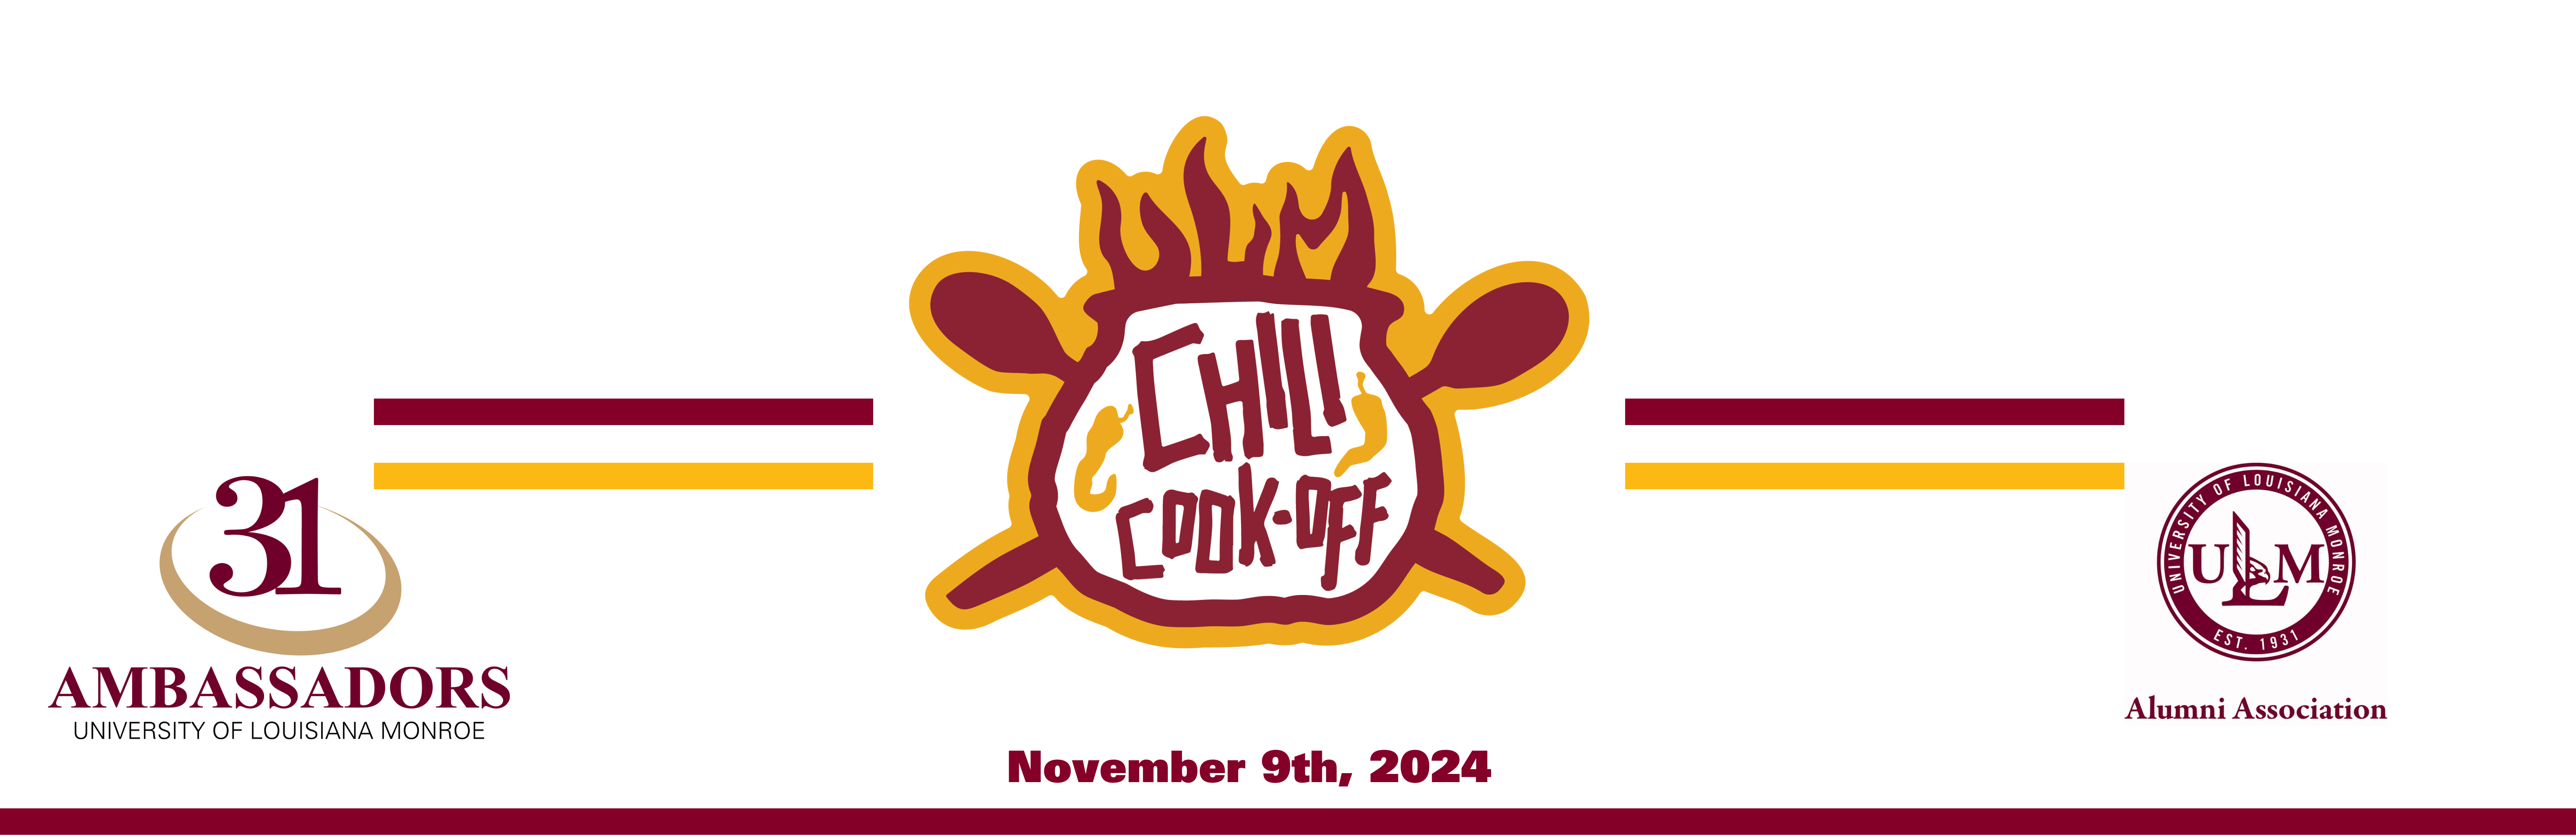 chili cook off banner